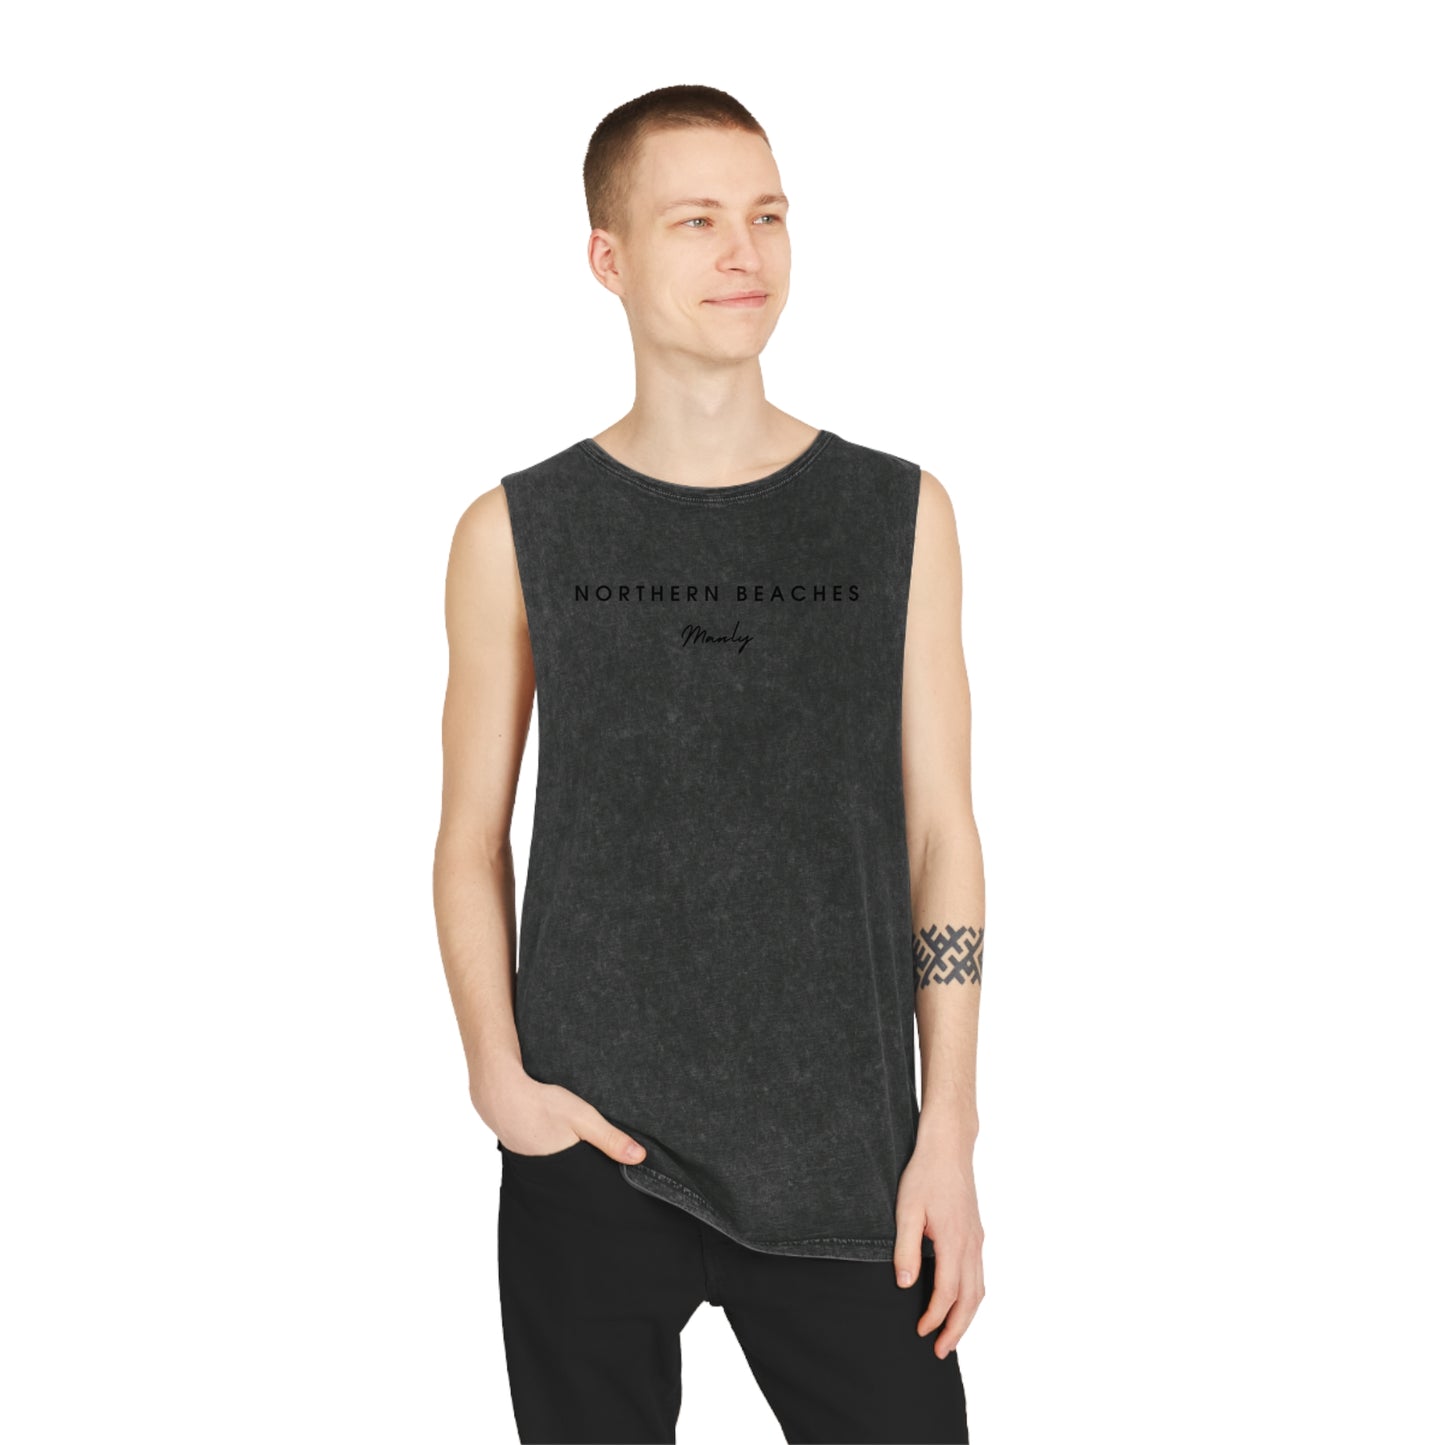 Stonewash Tank Top with Northern Beaches Manly logo